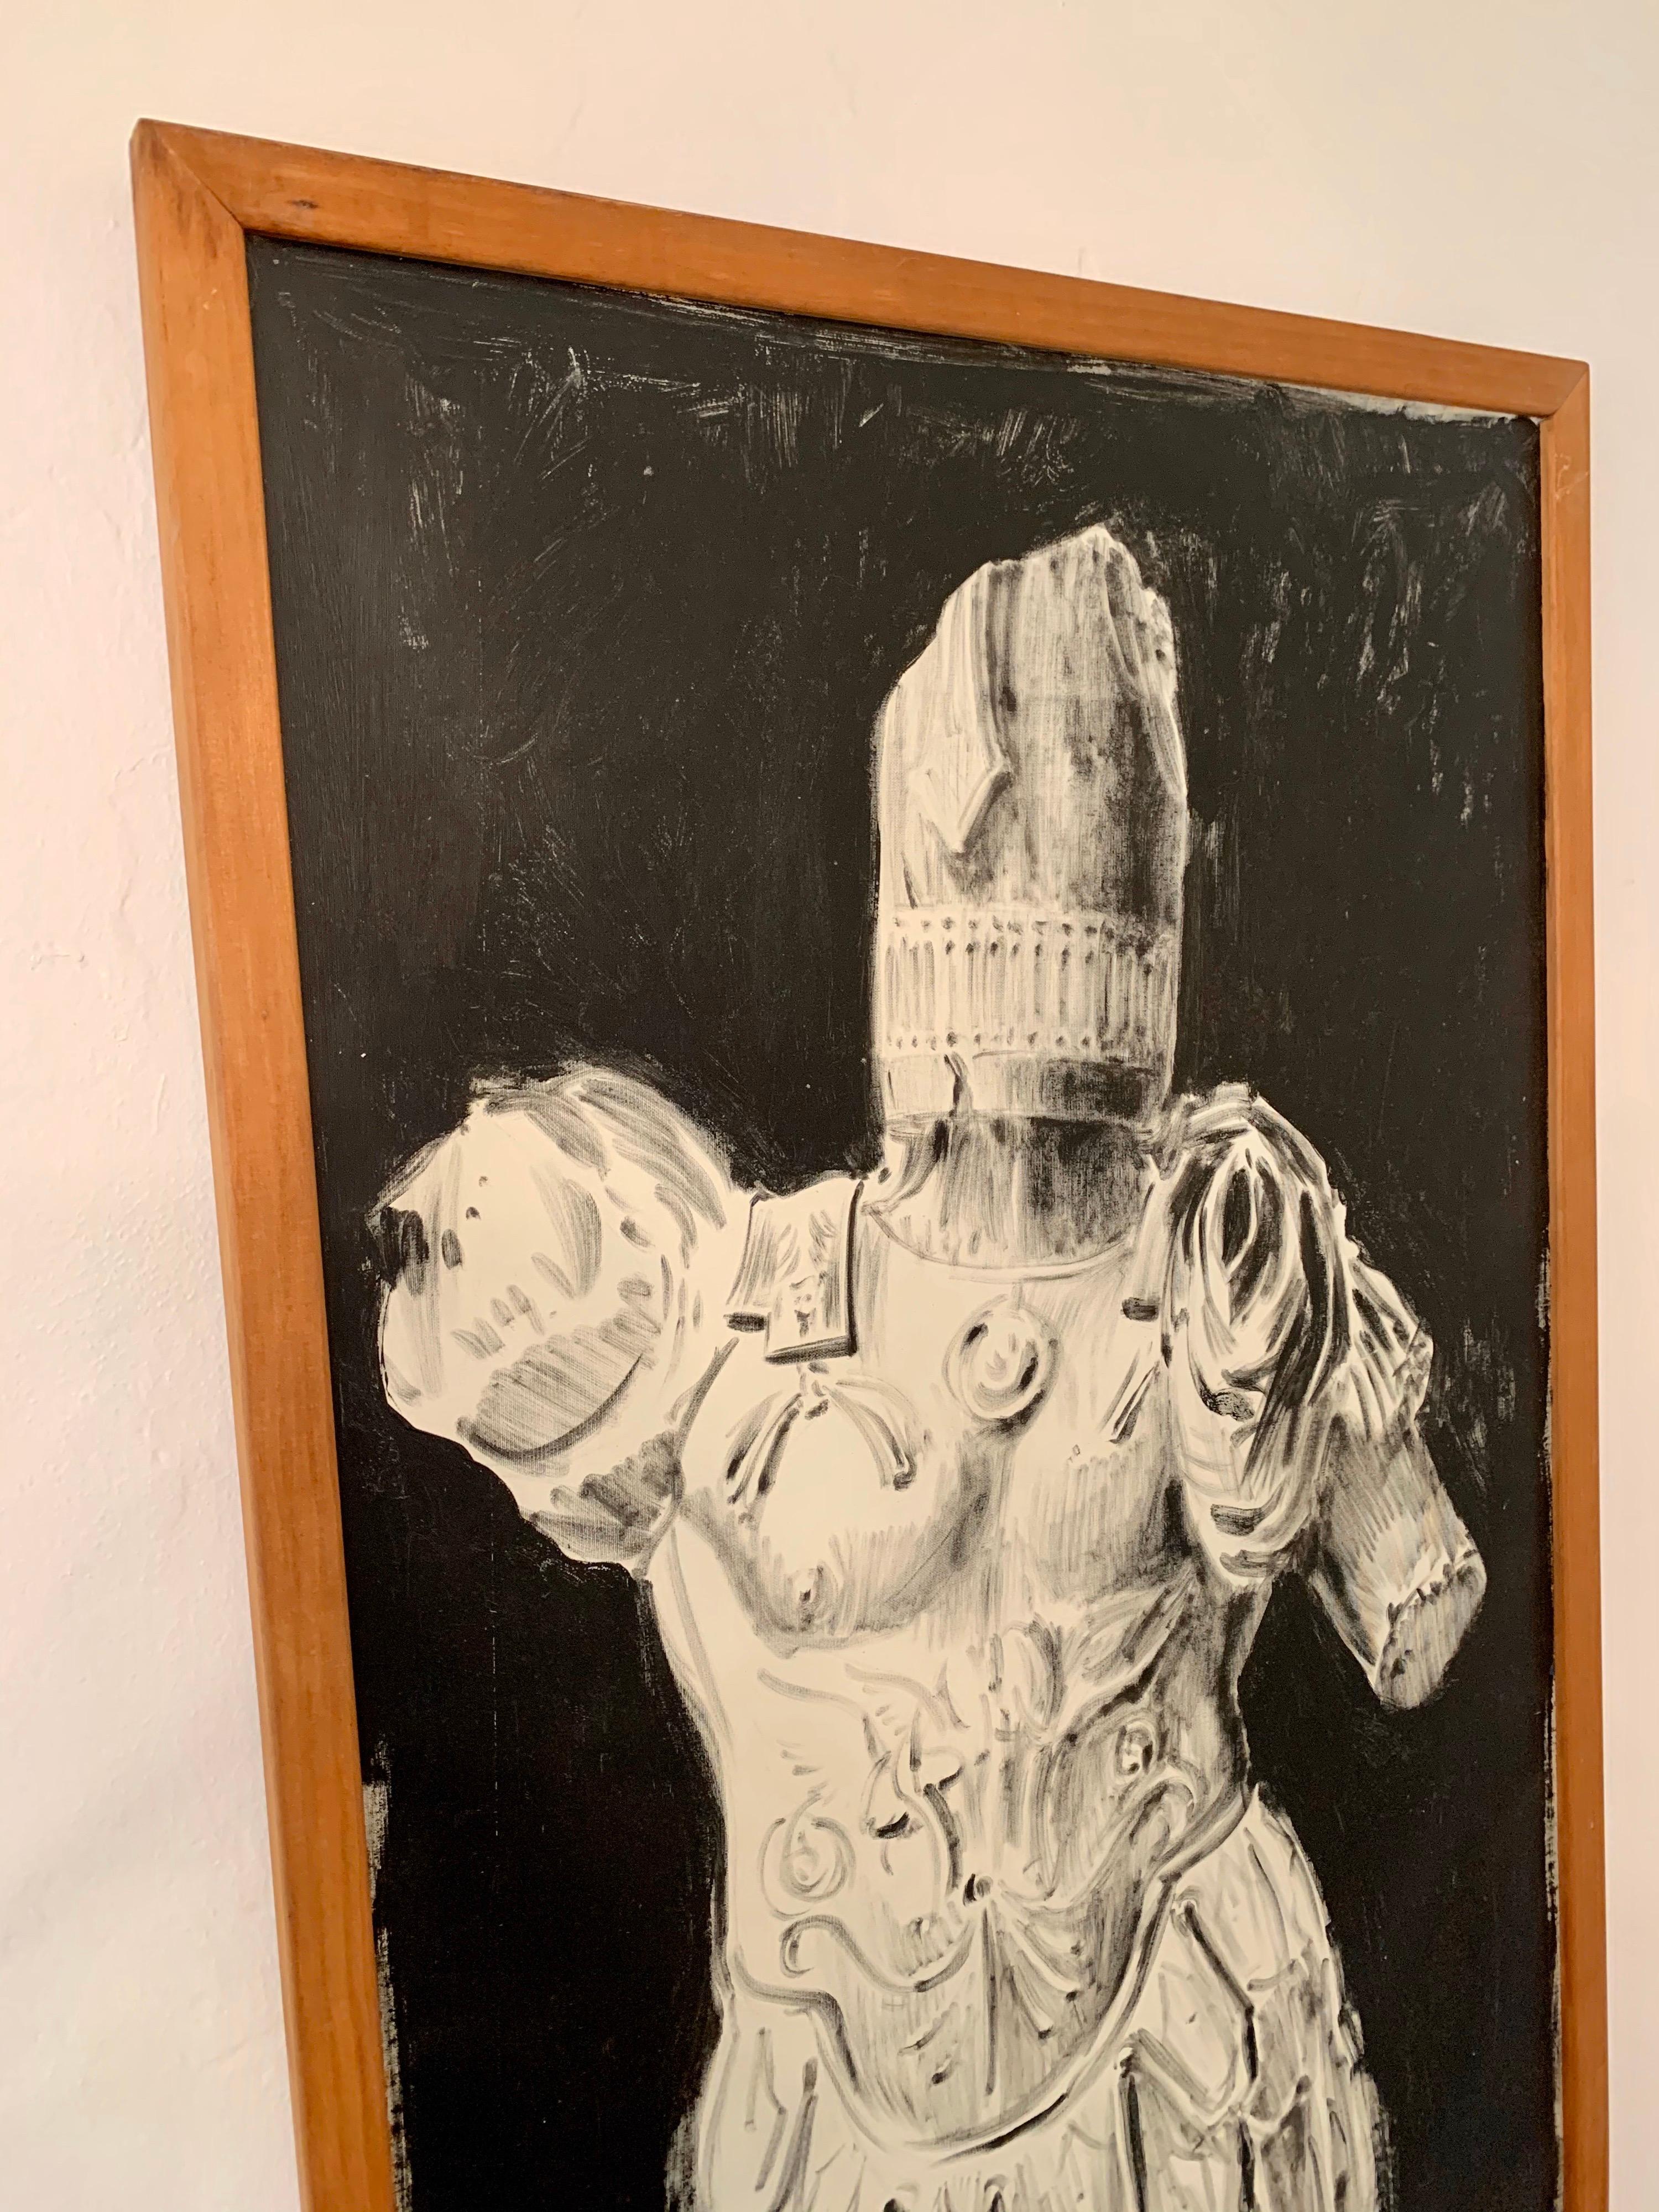 This amazing whimsical painting of a Roman Soldier with a Fountain Pen head. The artist, Pier Gustafson, thought it would be fun to replace Fountain Pens in place of human forms from Classic statuary. Framed in Teak - this art was exhibited as part